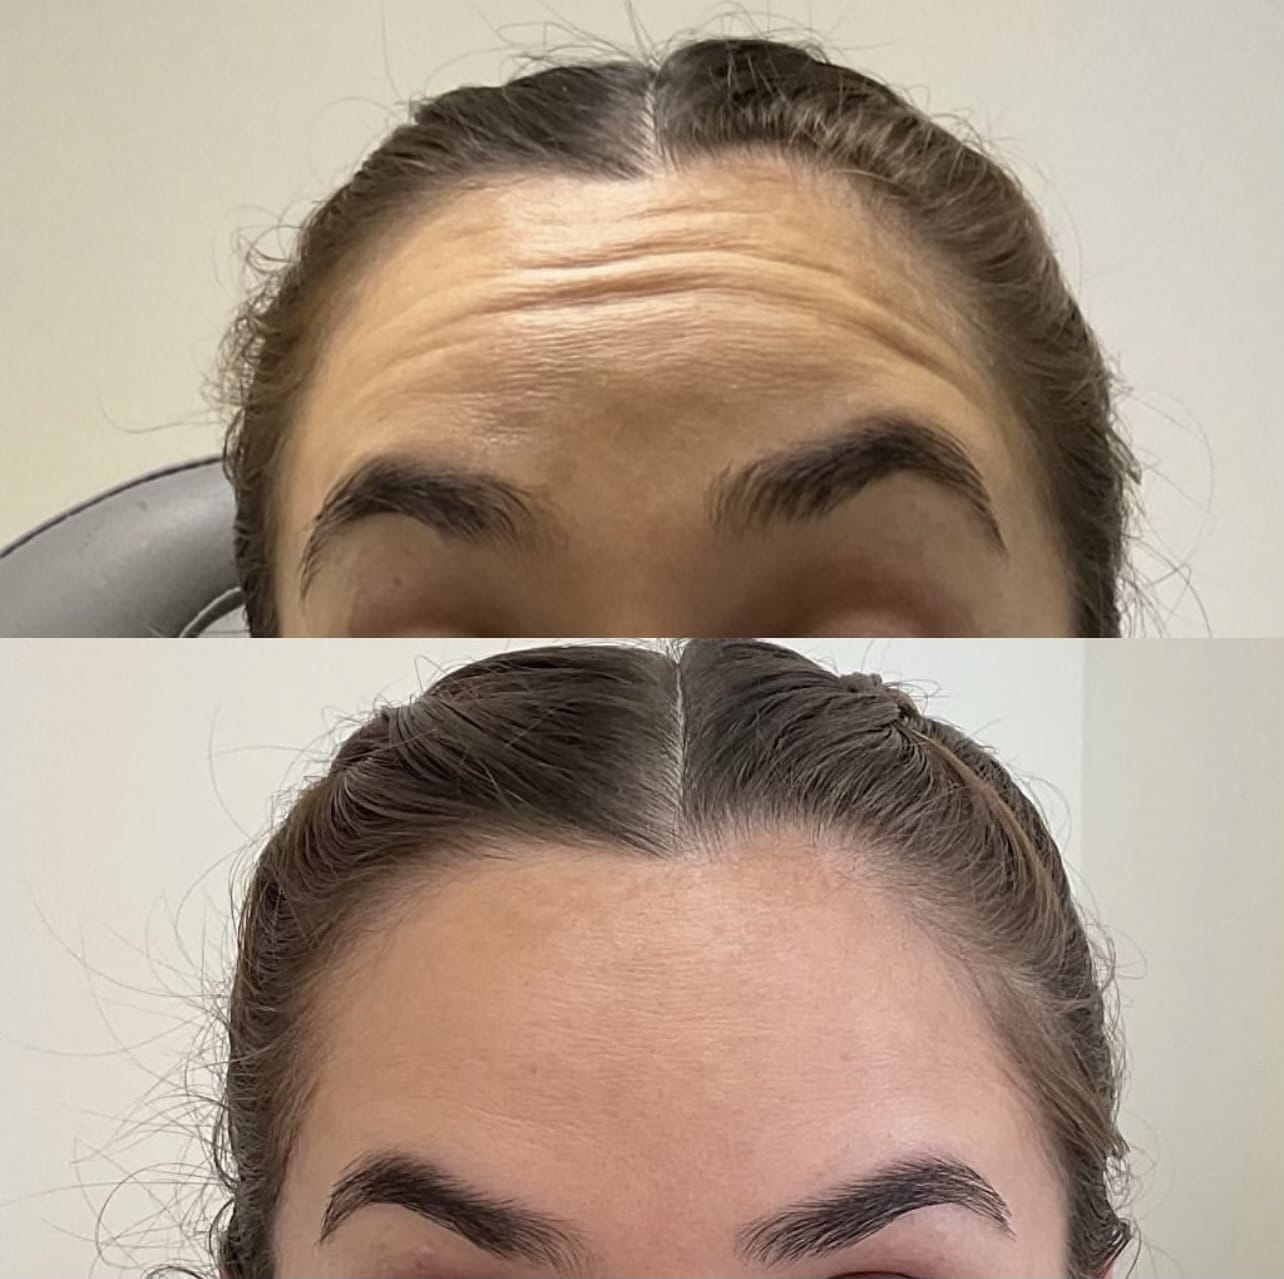 Face of a woman before and after a botox treatment to smooth expression lines. Concept of anti-aging and rejuvenation cosmetics on forehead wrinkles | Sculpted Aesthetics in Columbia, SC